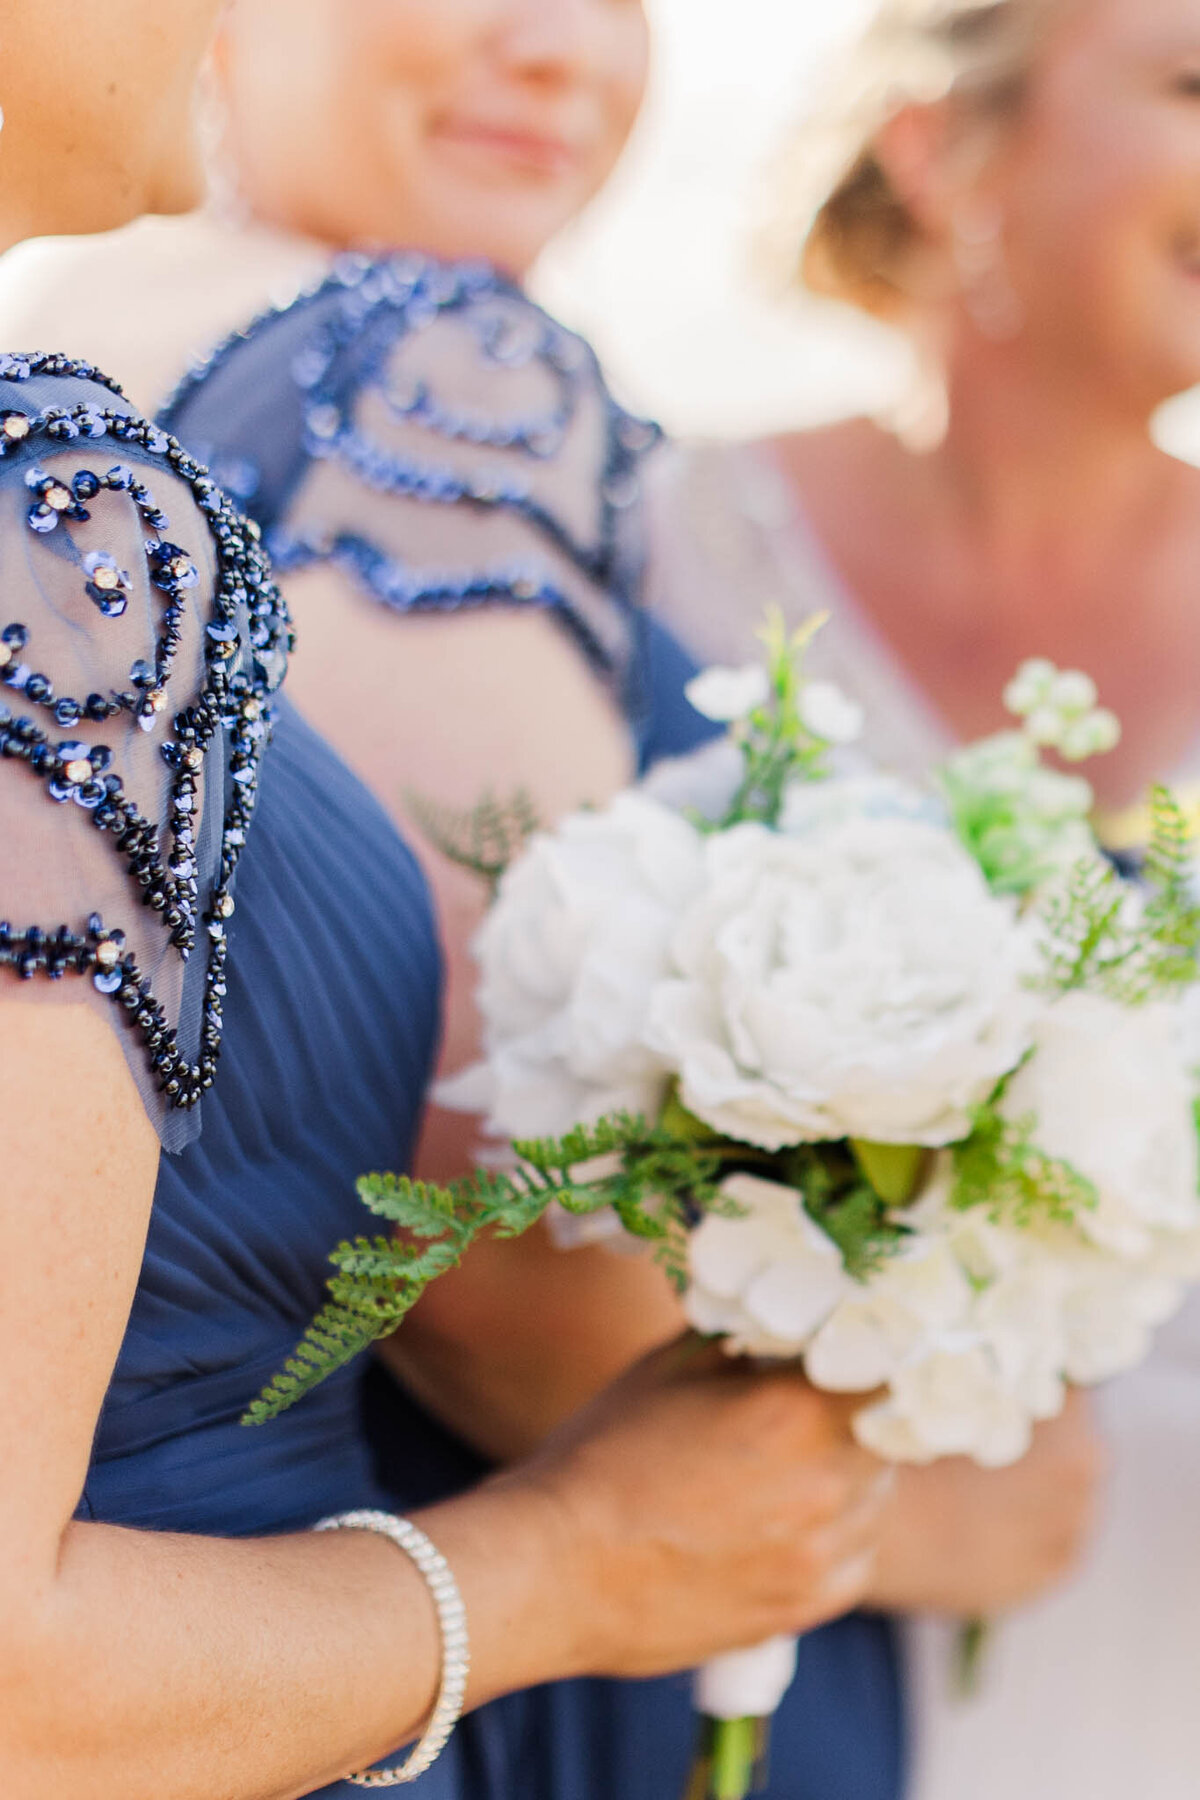 detailed photo of bridesmaids dress and flowers.